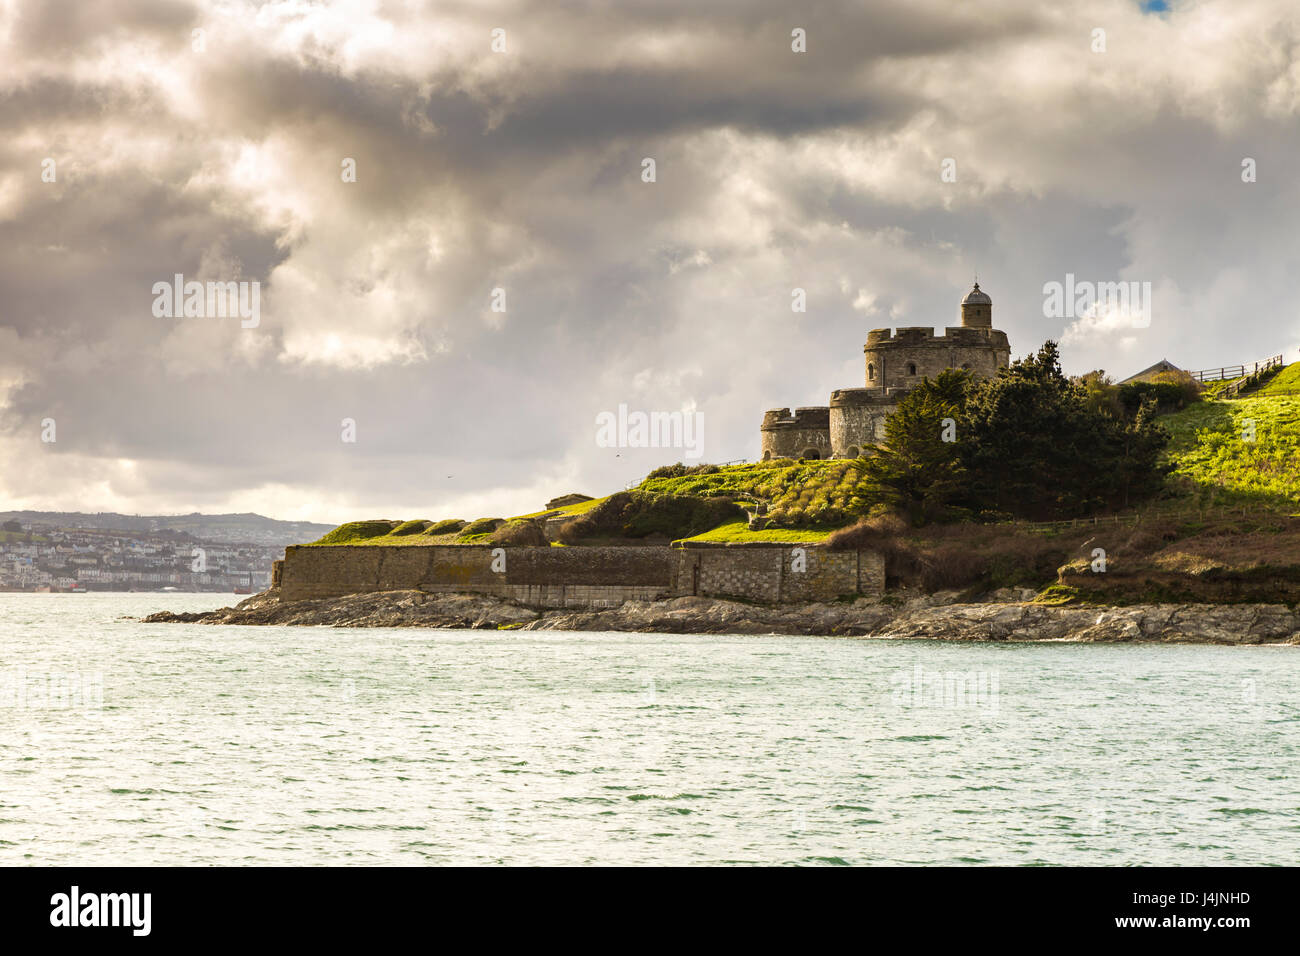 St Mawes Castle, built during the reign of Henry VIIIth,  overlooking the Fal estuary near St Mawes, Cornwall, UK Stock Photo